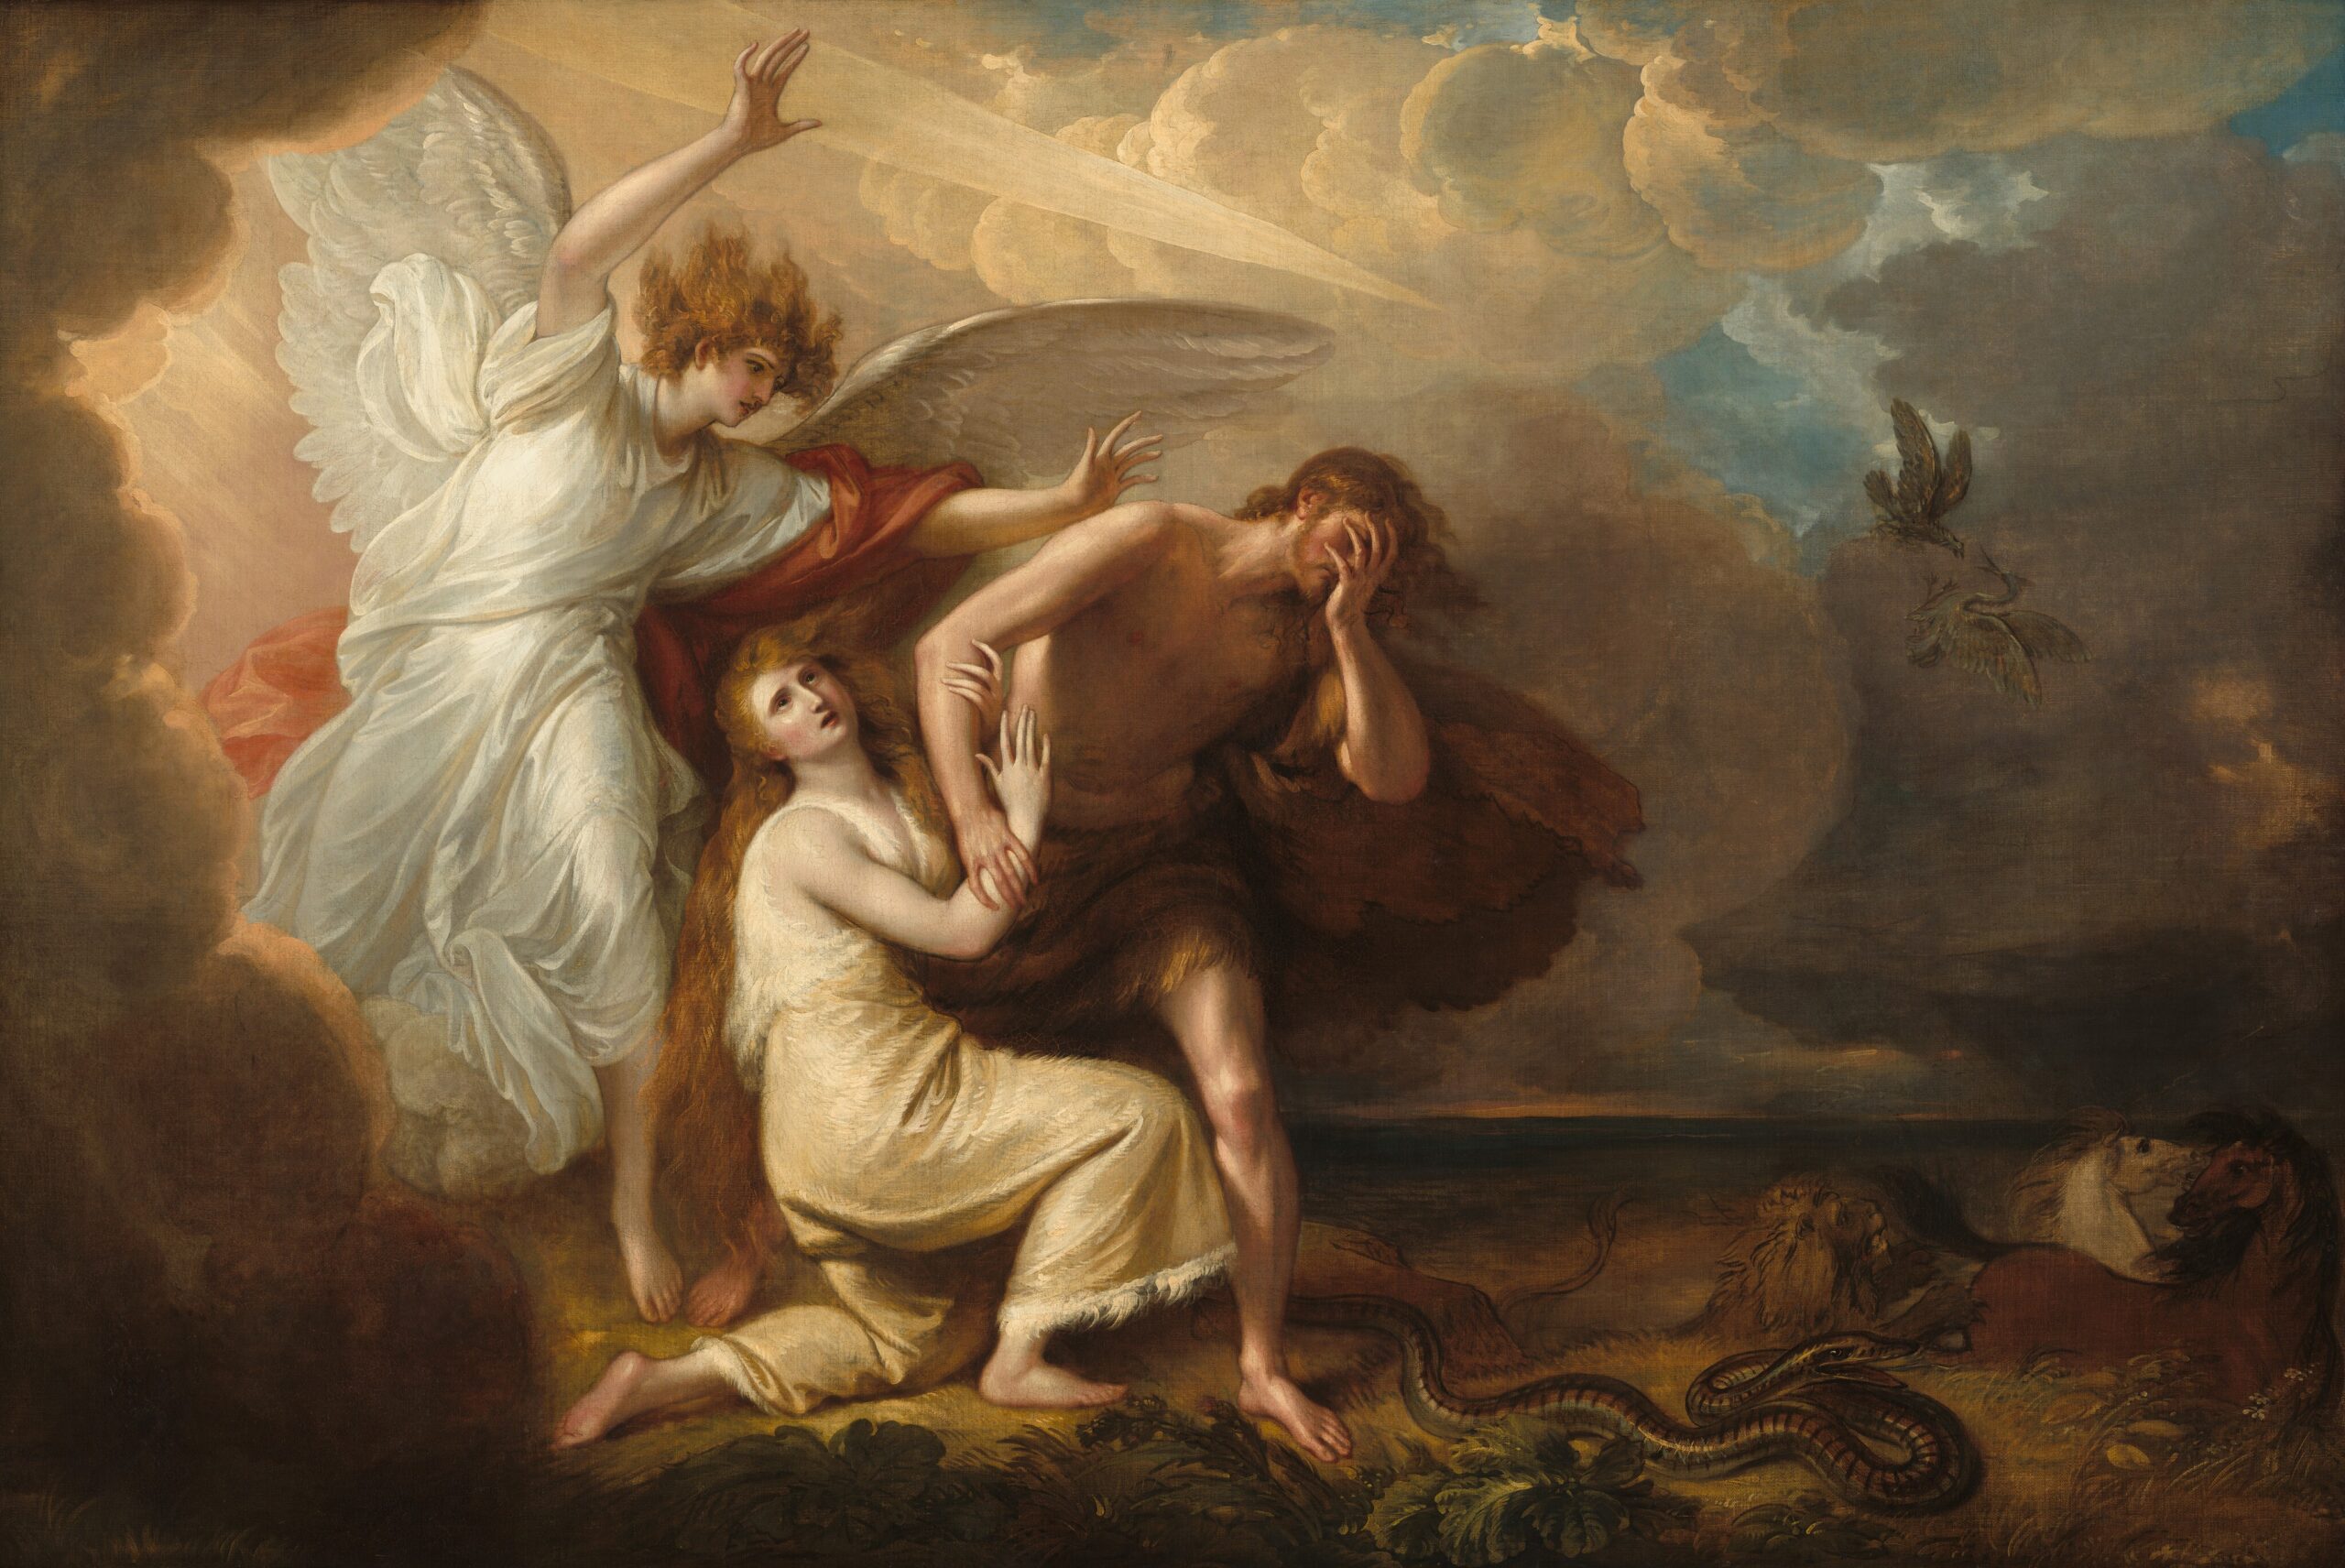 "The Expulsion of Adam and Eve from Paradise" Benjamin West